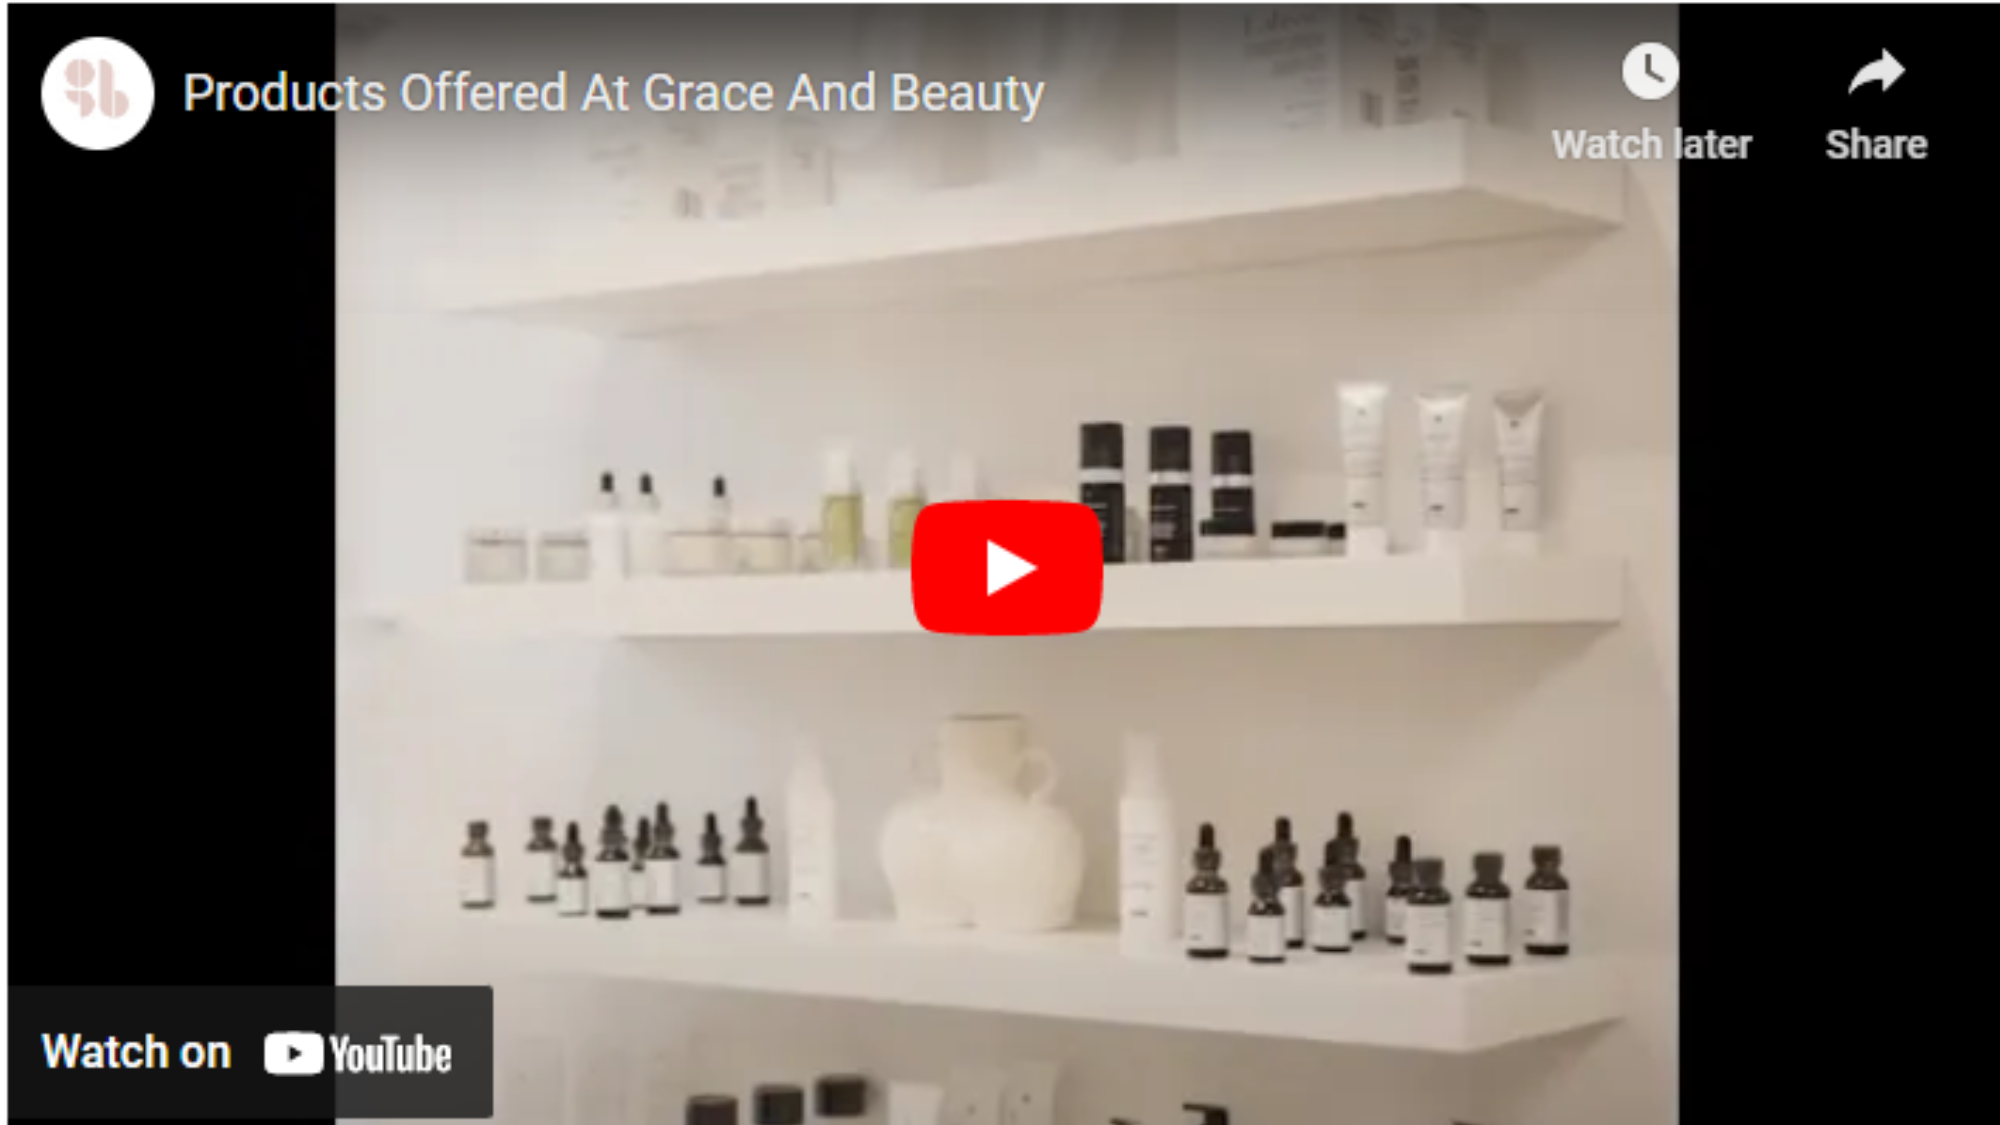 Products Offered At Grace And Beauty